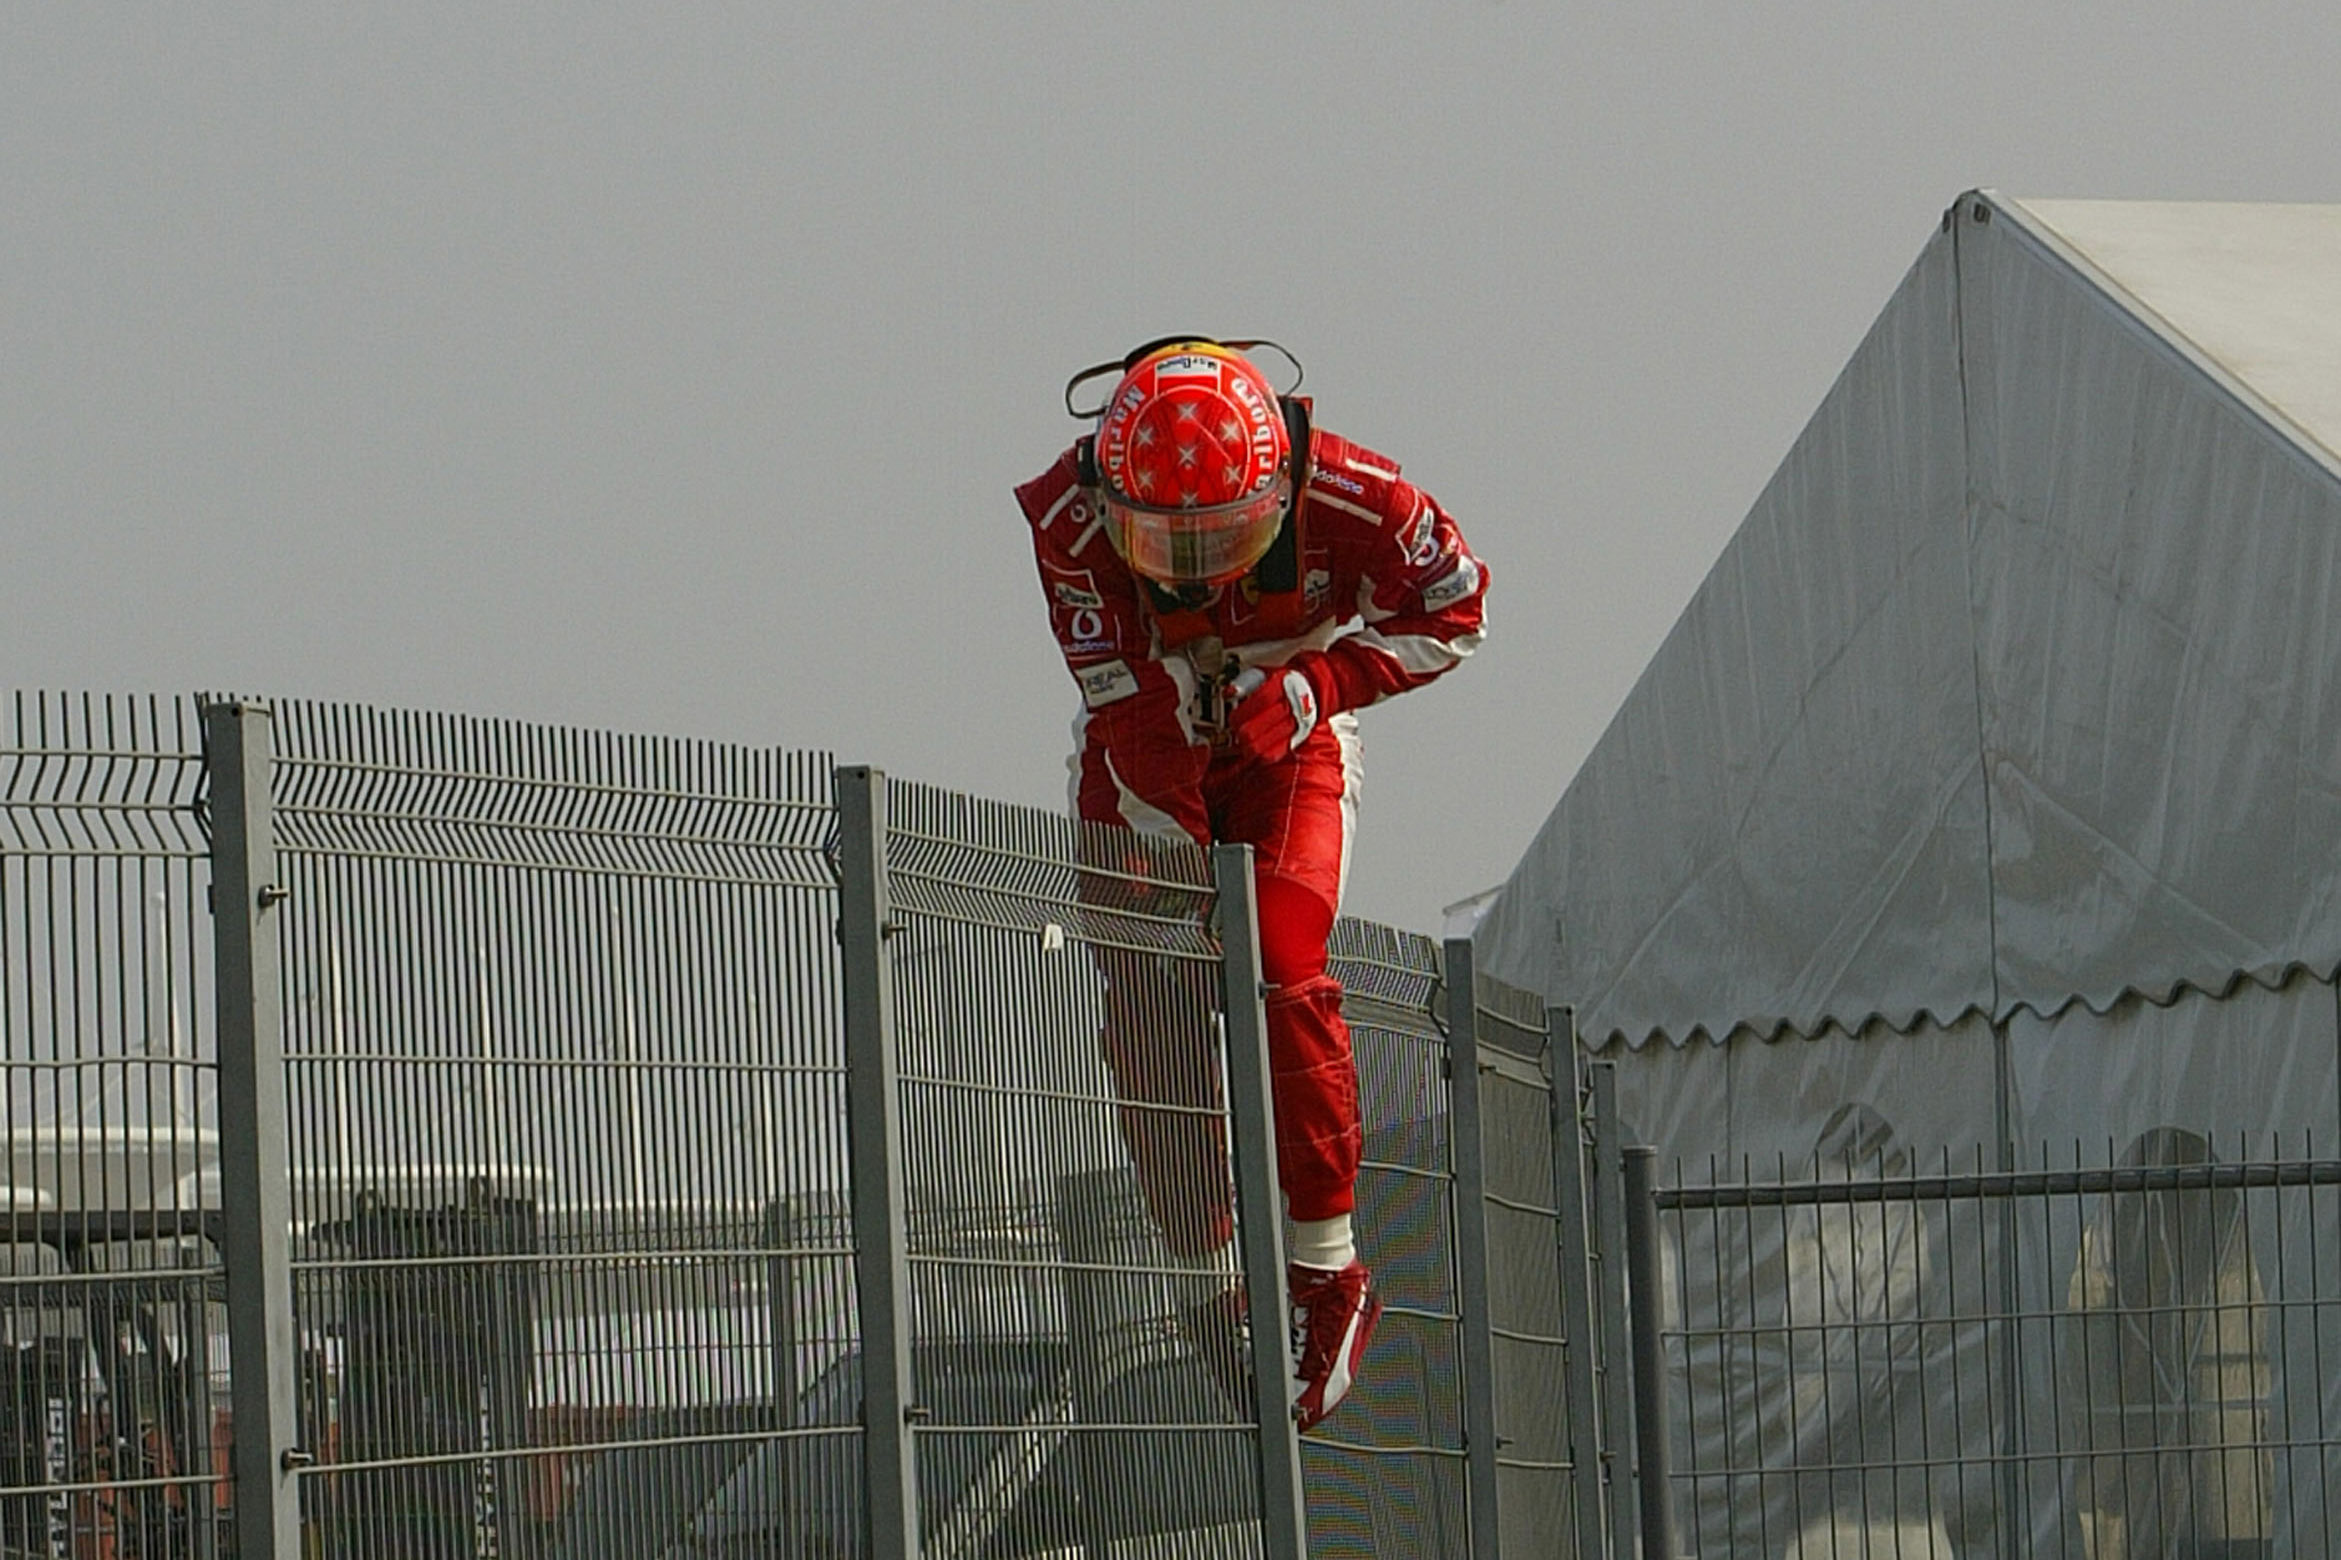 seven chinese gp moments you’ve probably forgotten